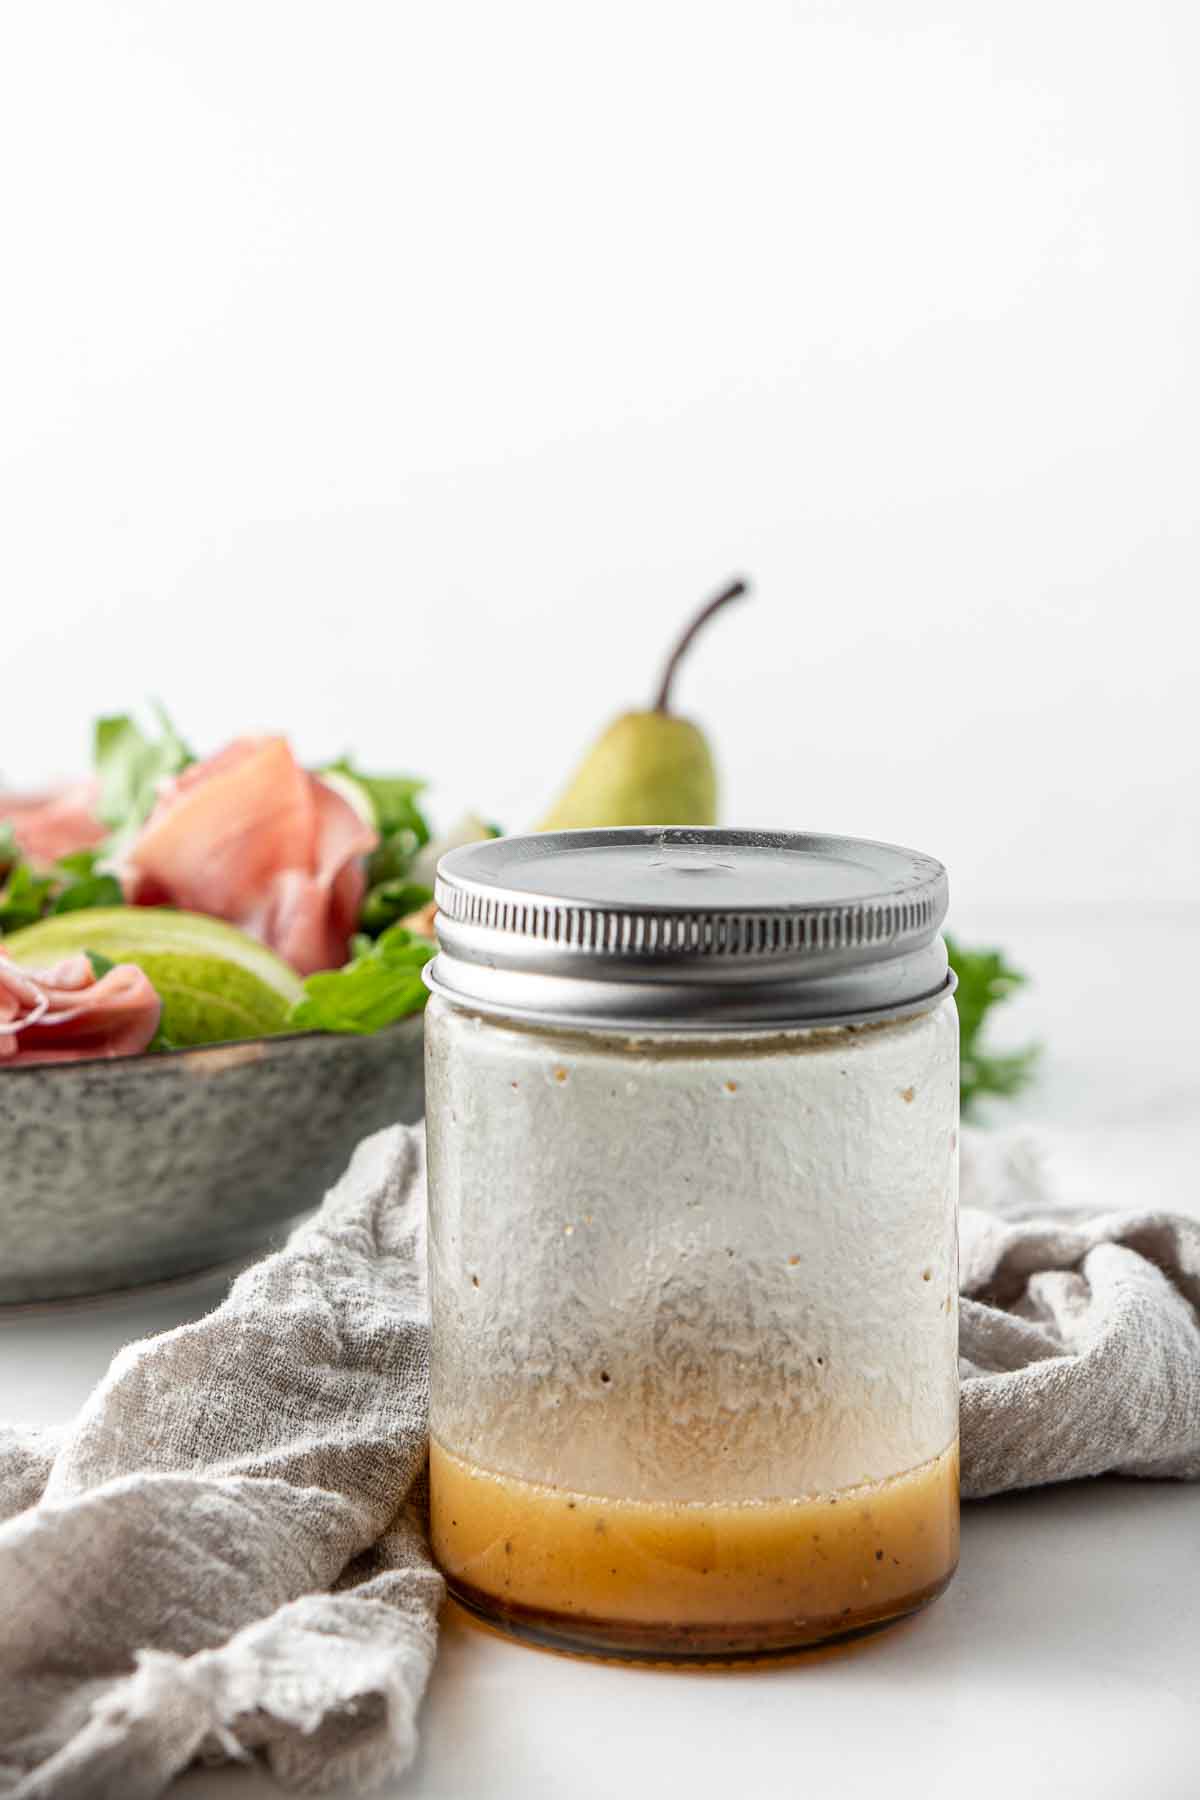 The dressing made in a jar. 